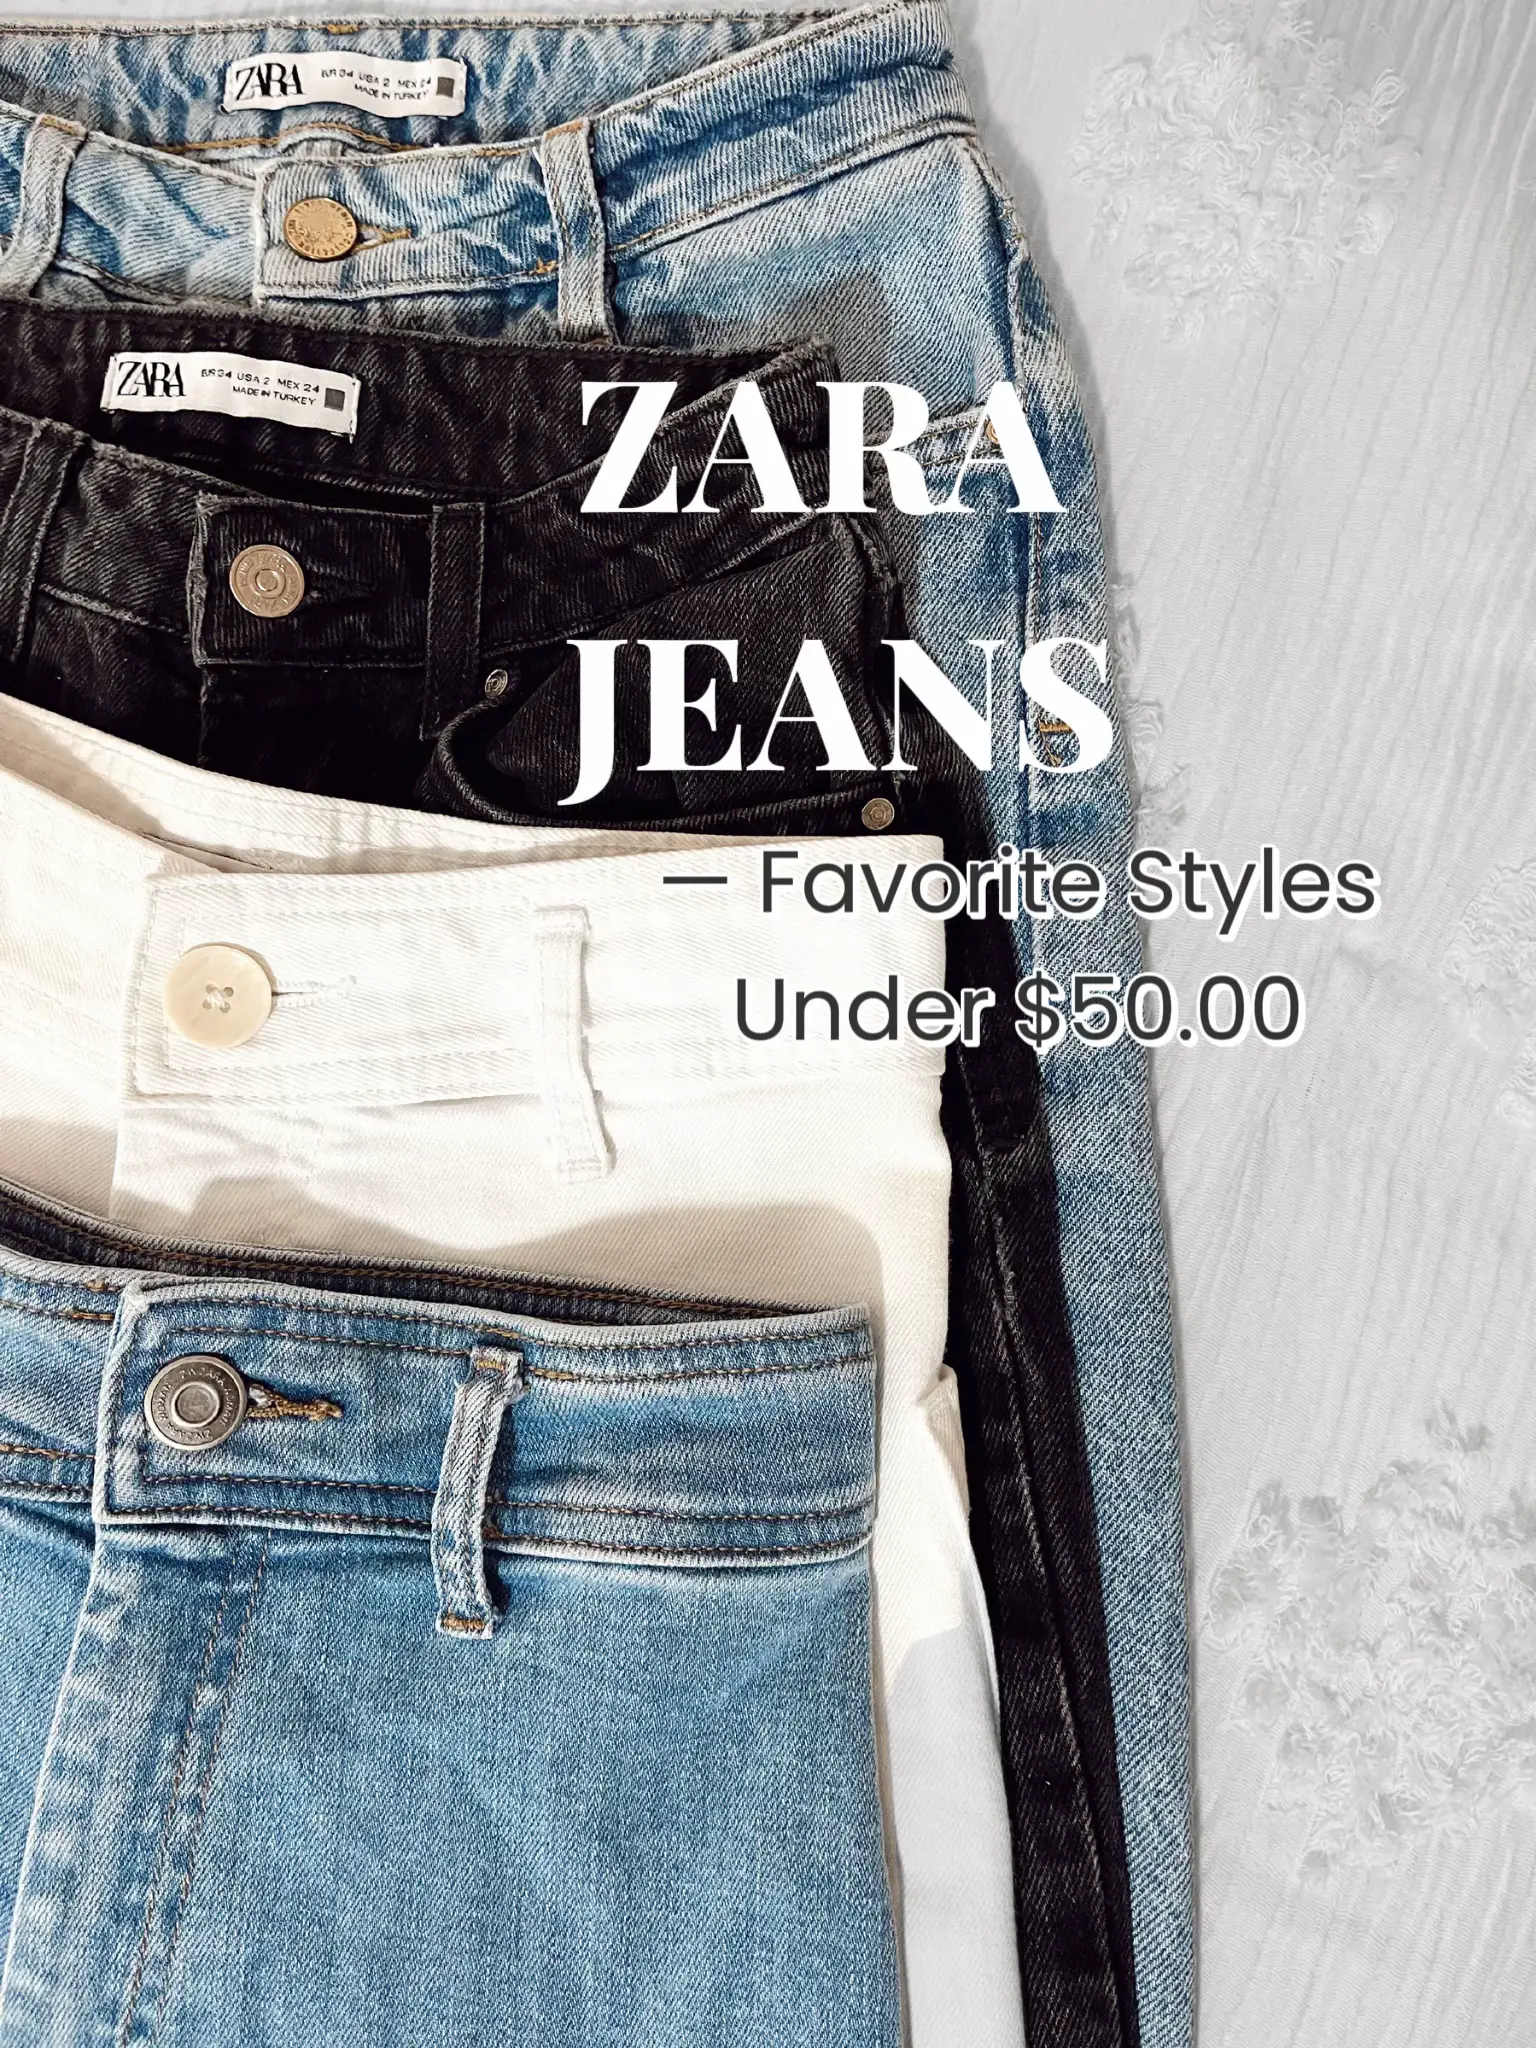 My Favorite Zara Jeans!👖, Gallery posted by Remi Love🌸☺️